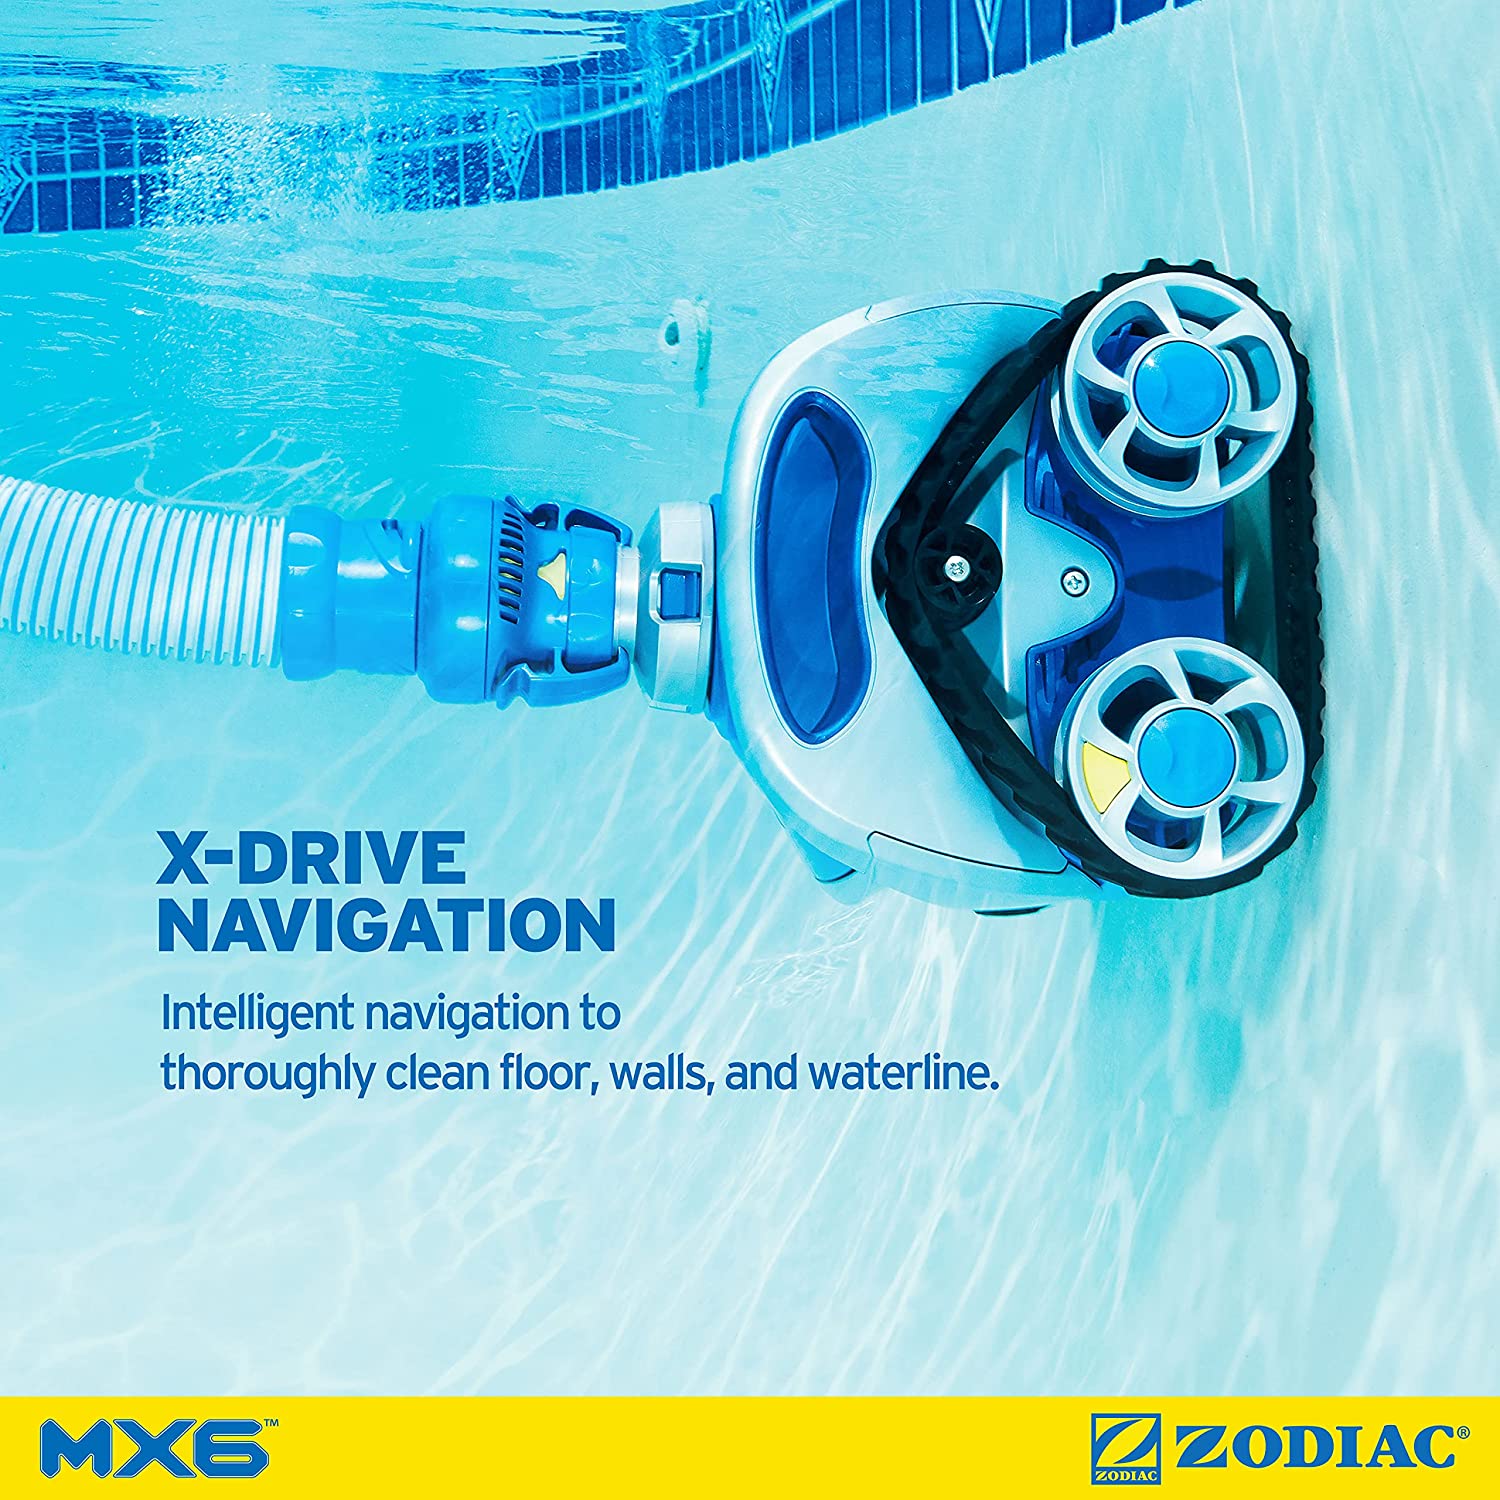 4. Zodiac MX6 Automatic Suction-Side Pool Cleaner Vacuum